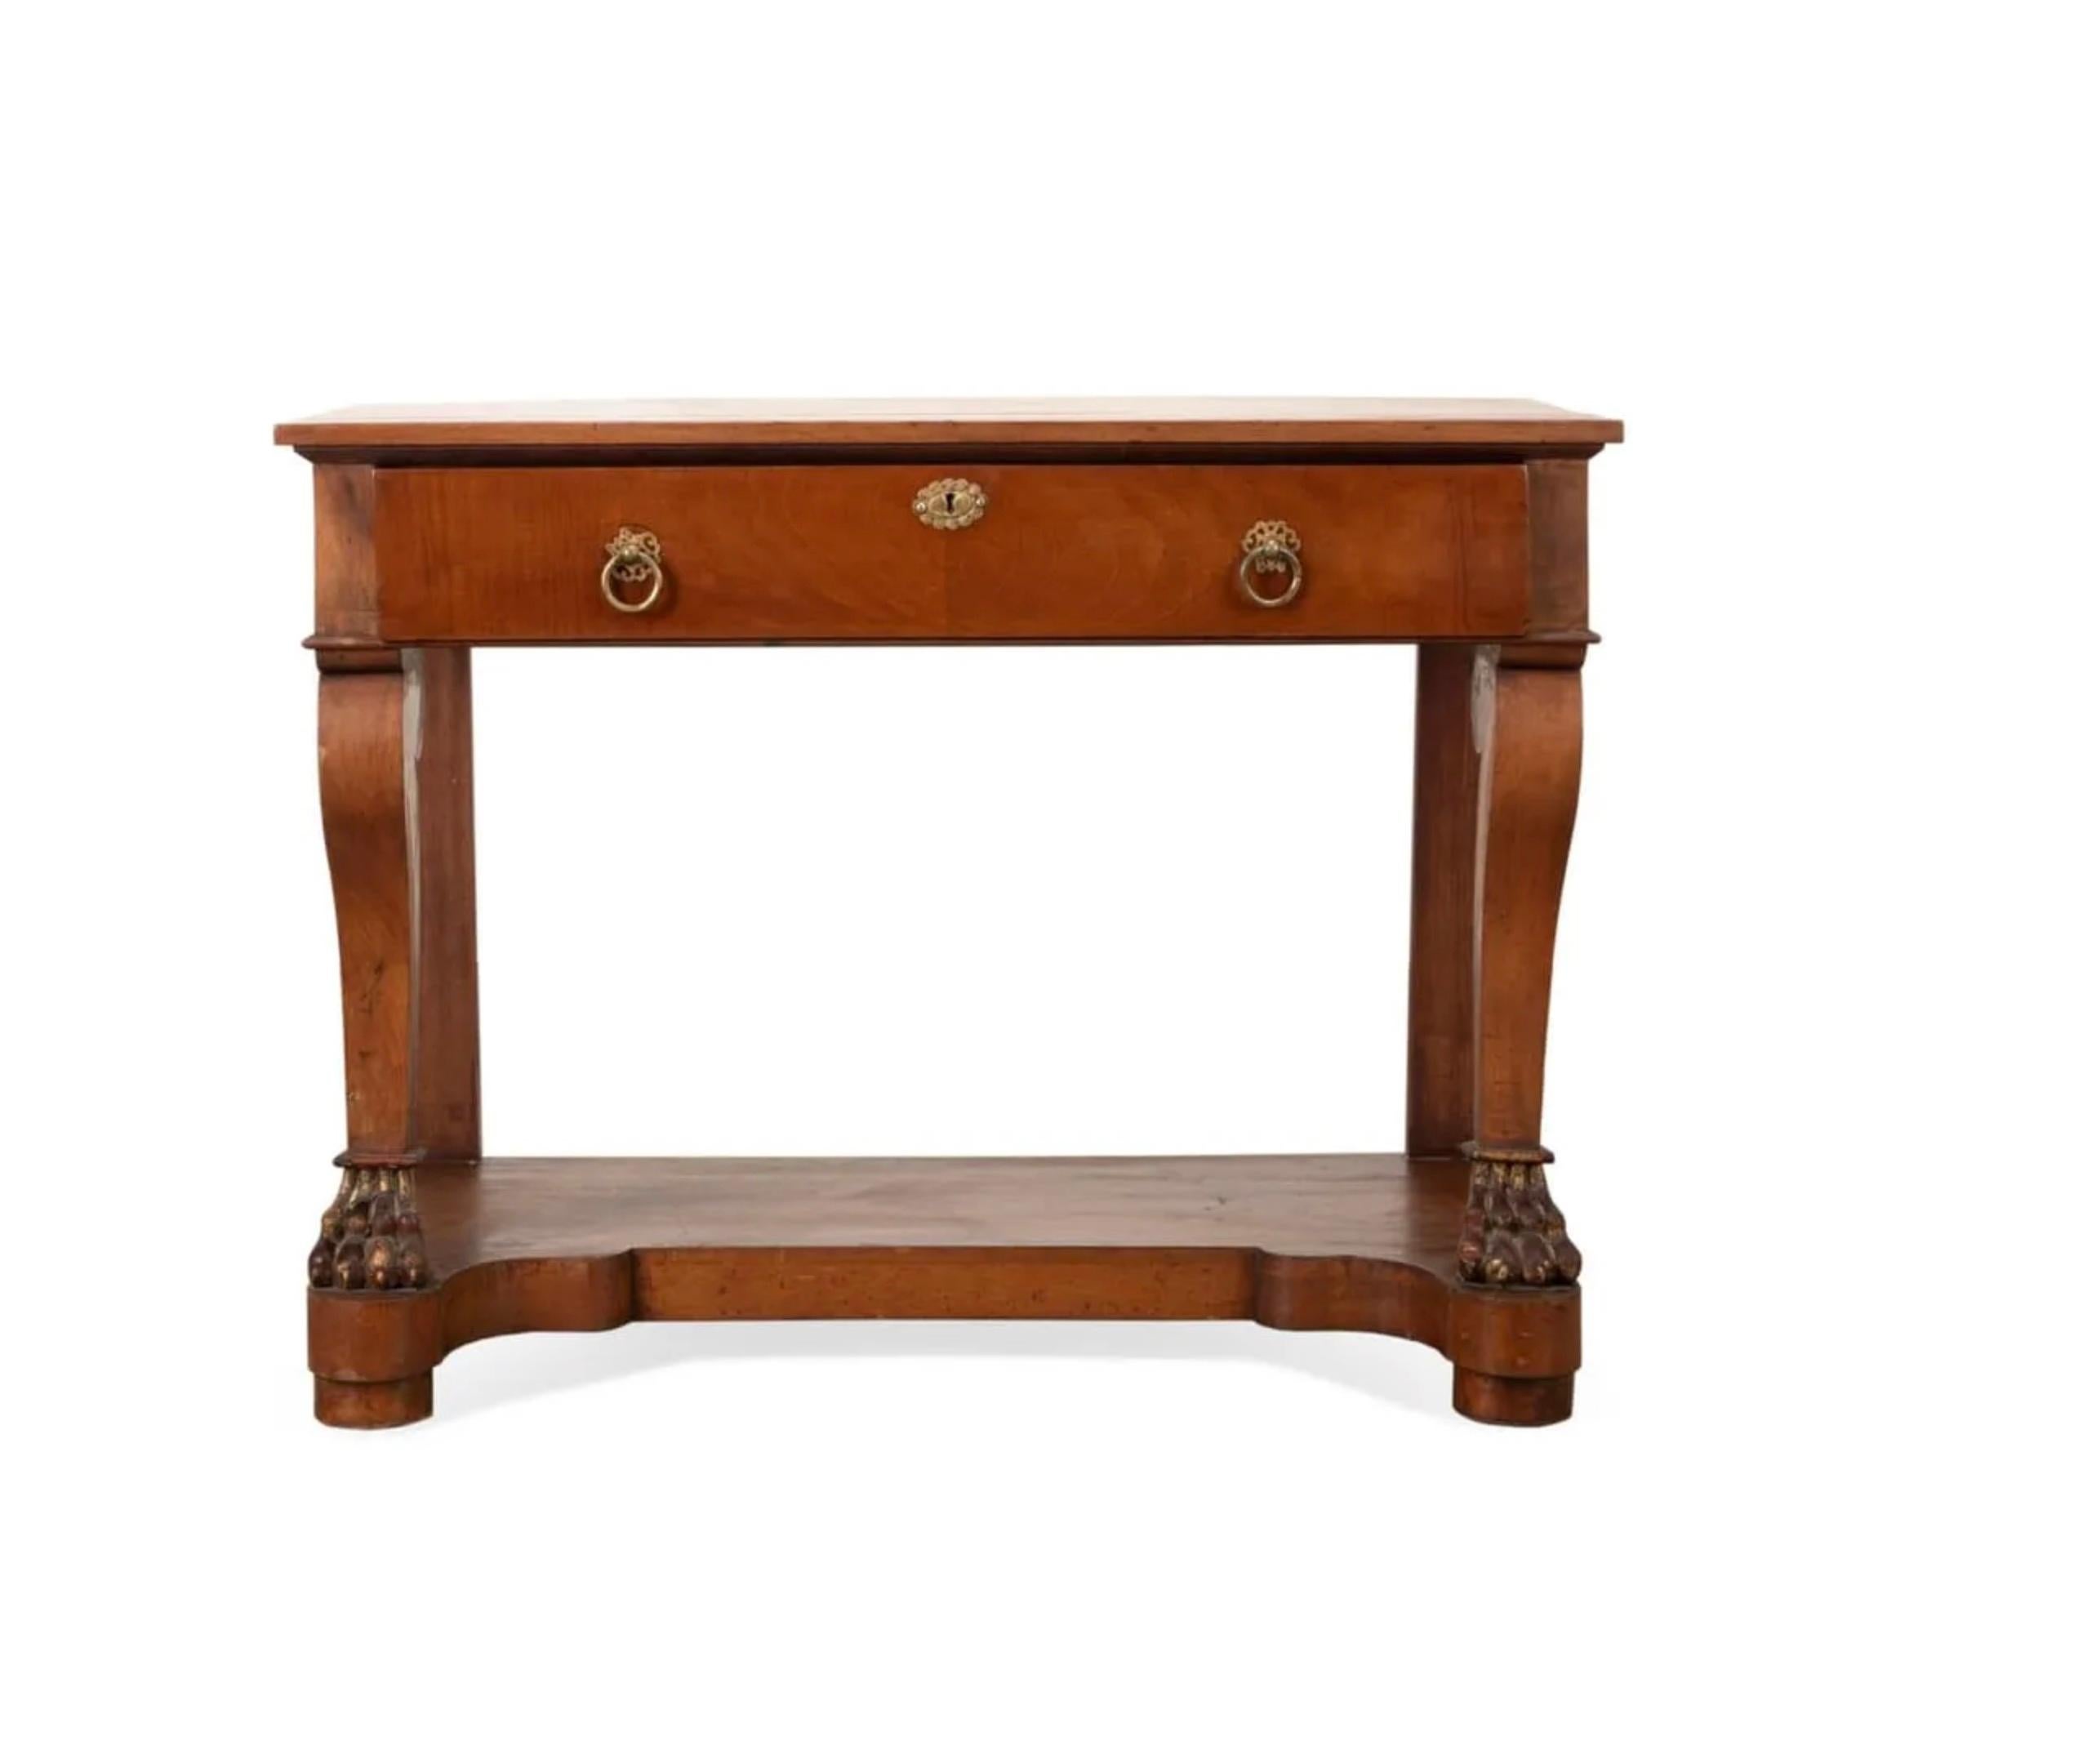 Continental, French, fruit wood Charles X console table, second half 19th century, having a rectangular top, over a shaped frieze with a single drawer, supported on scroll legs terminating in animal's paws, resting on a platform base having block